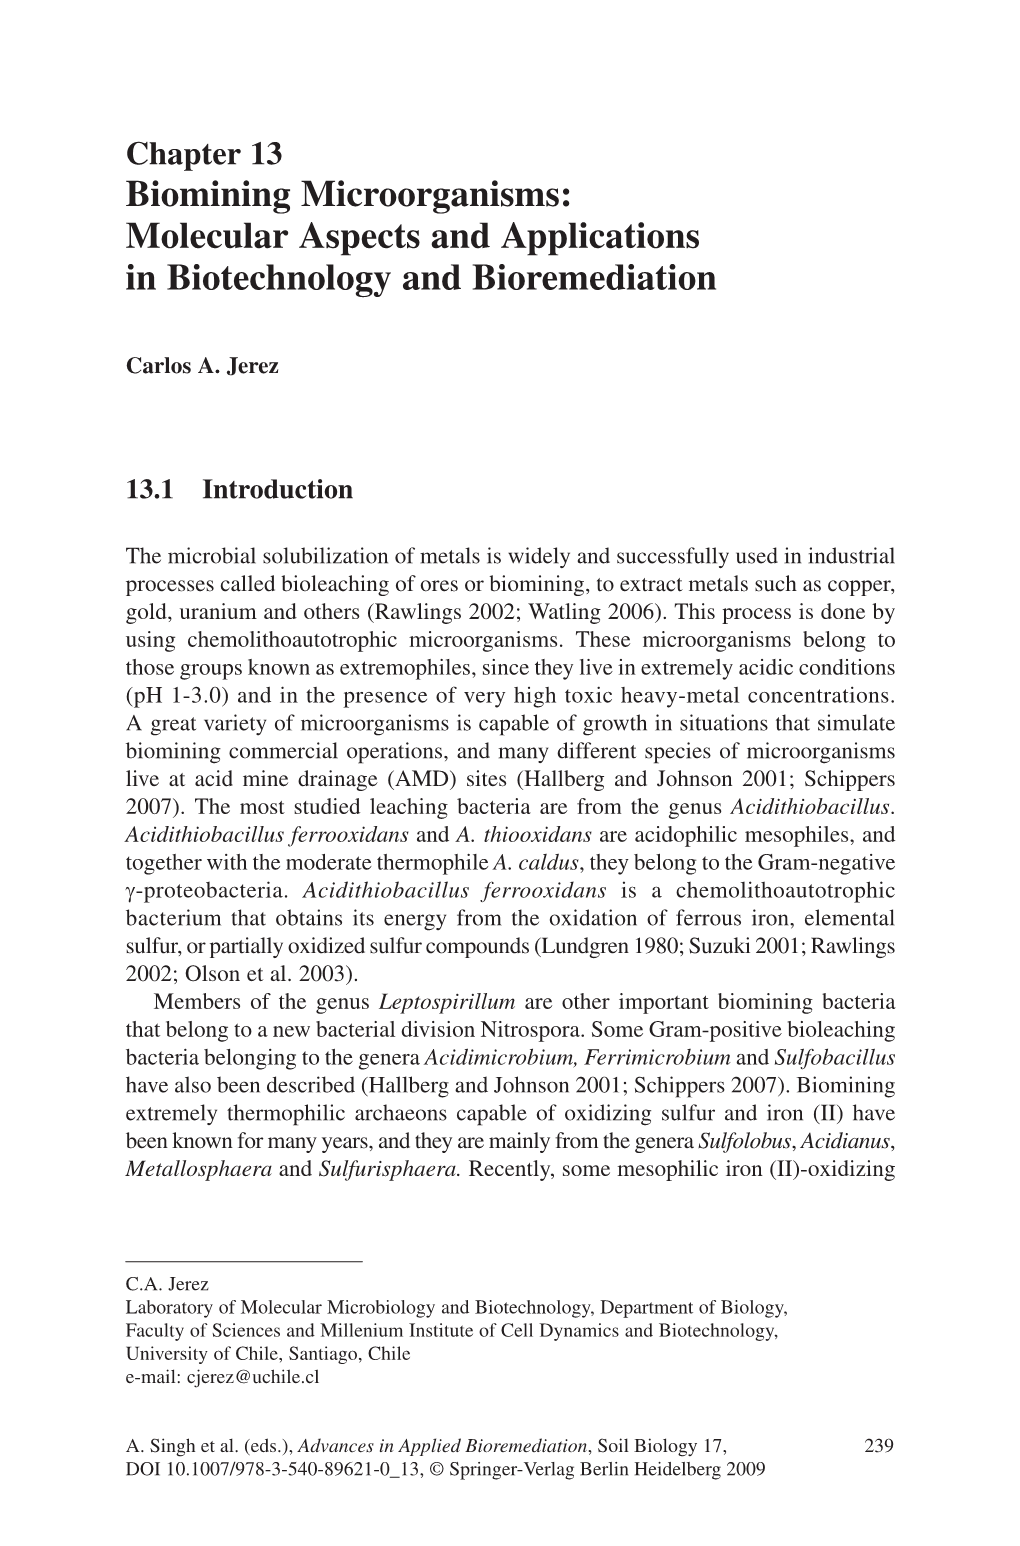 Biomining Microorganisms: Molecular Aspects and Applications in Biotechnology and Bioremediation